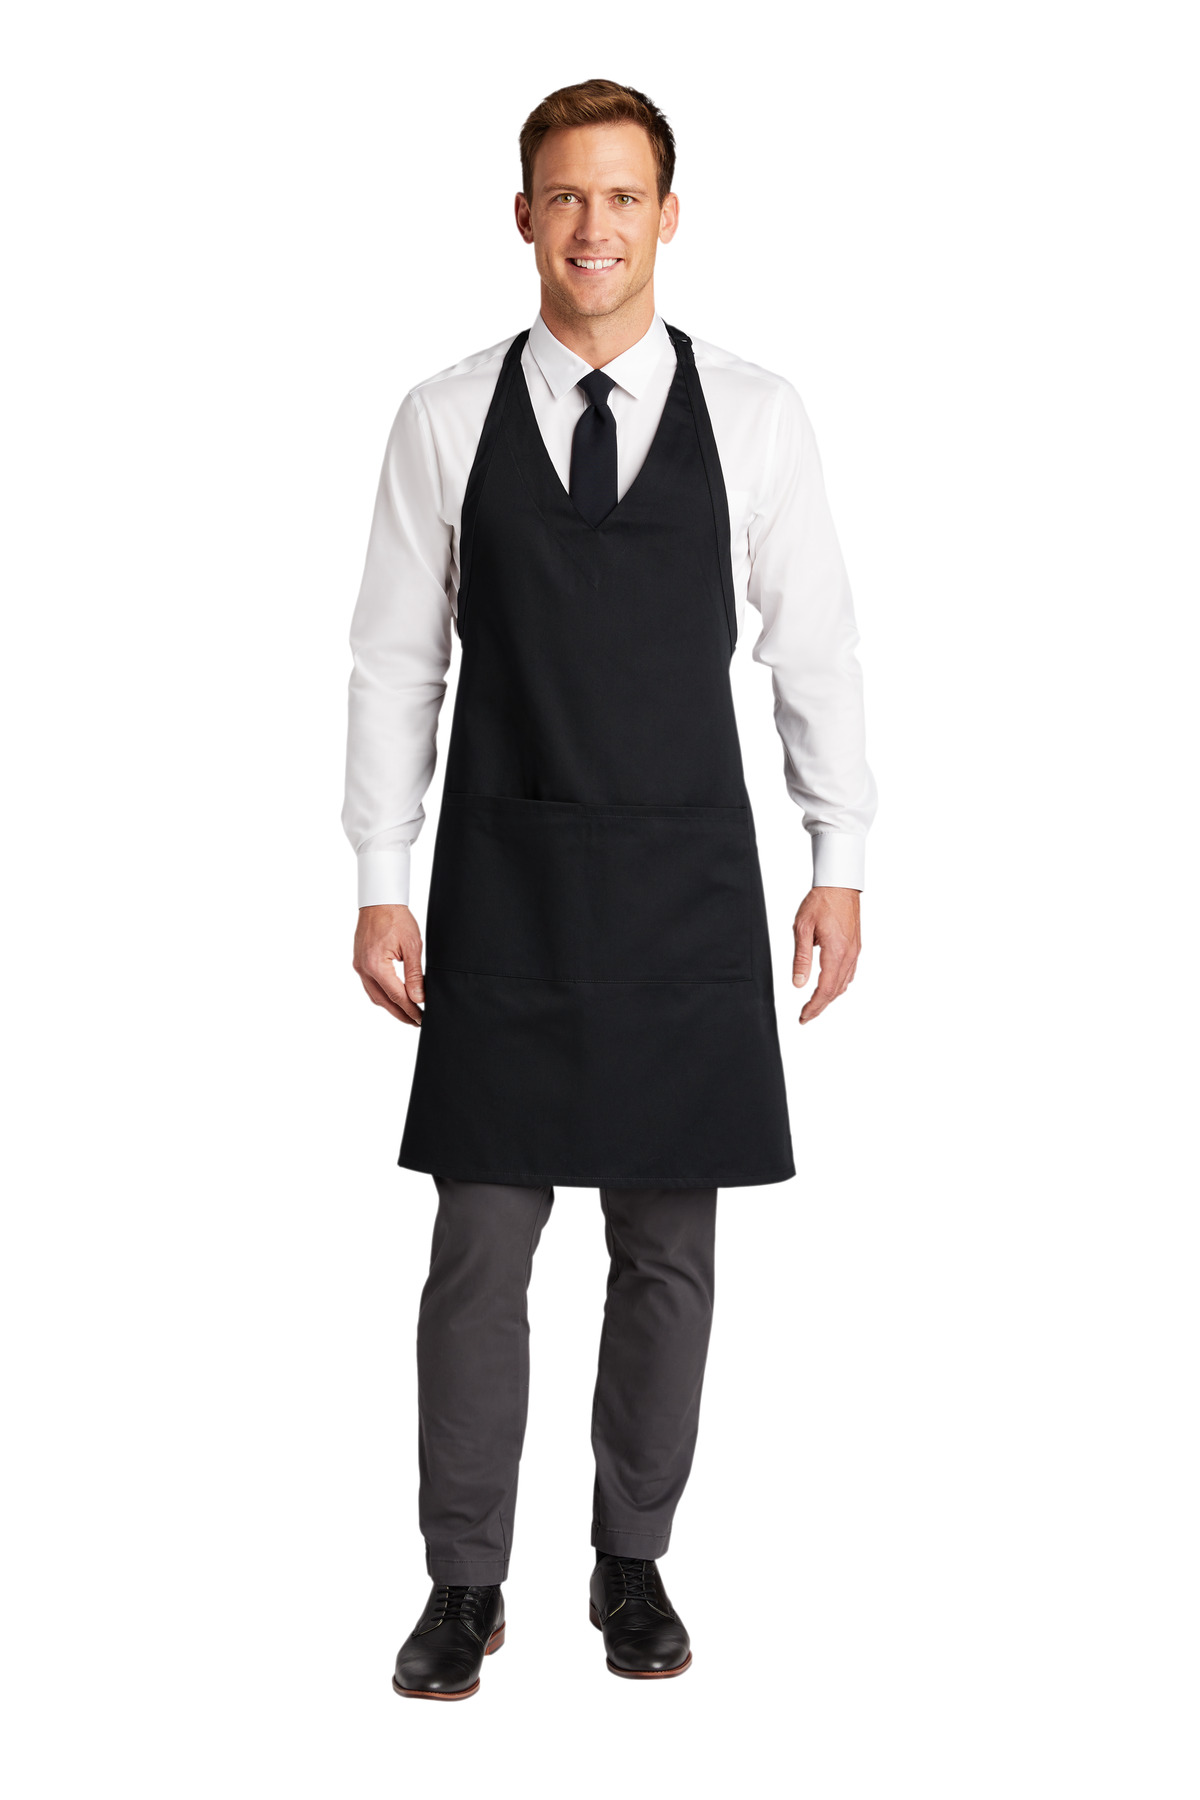 Port Authority Easy Care Tuxedo Apron with Stain Release. A704